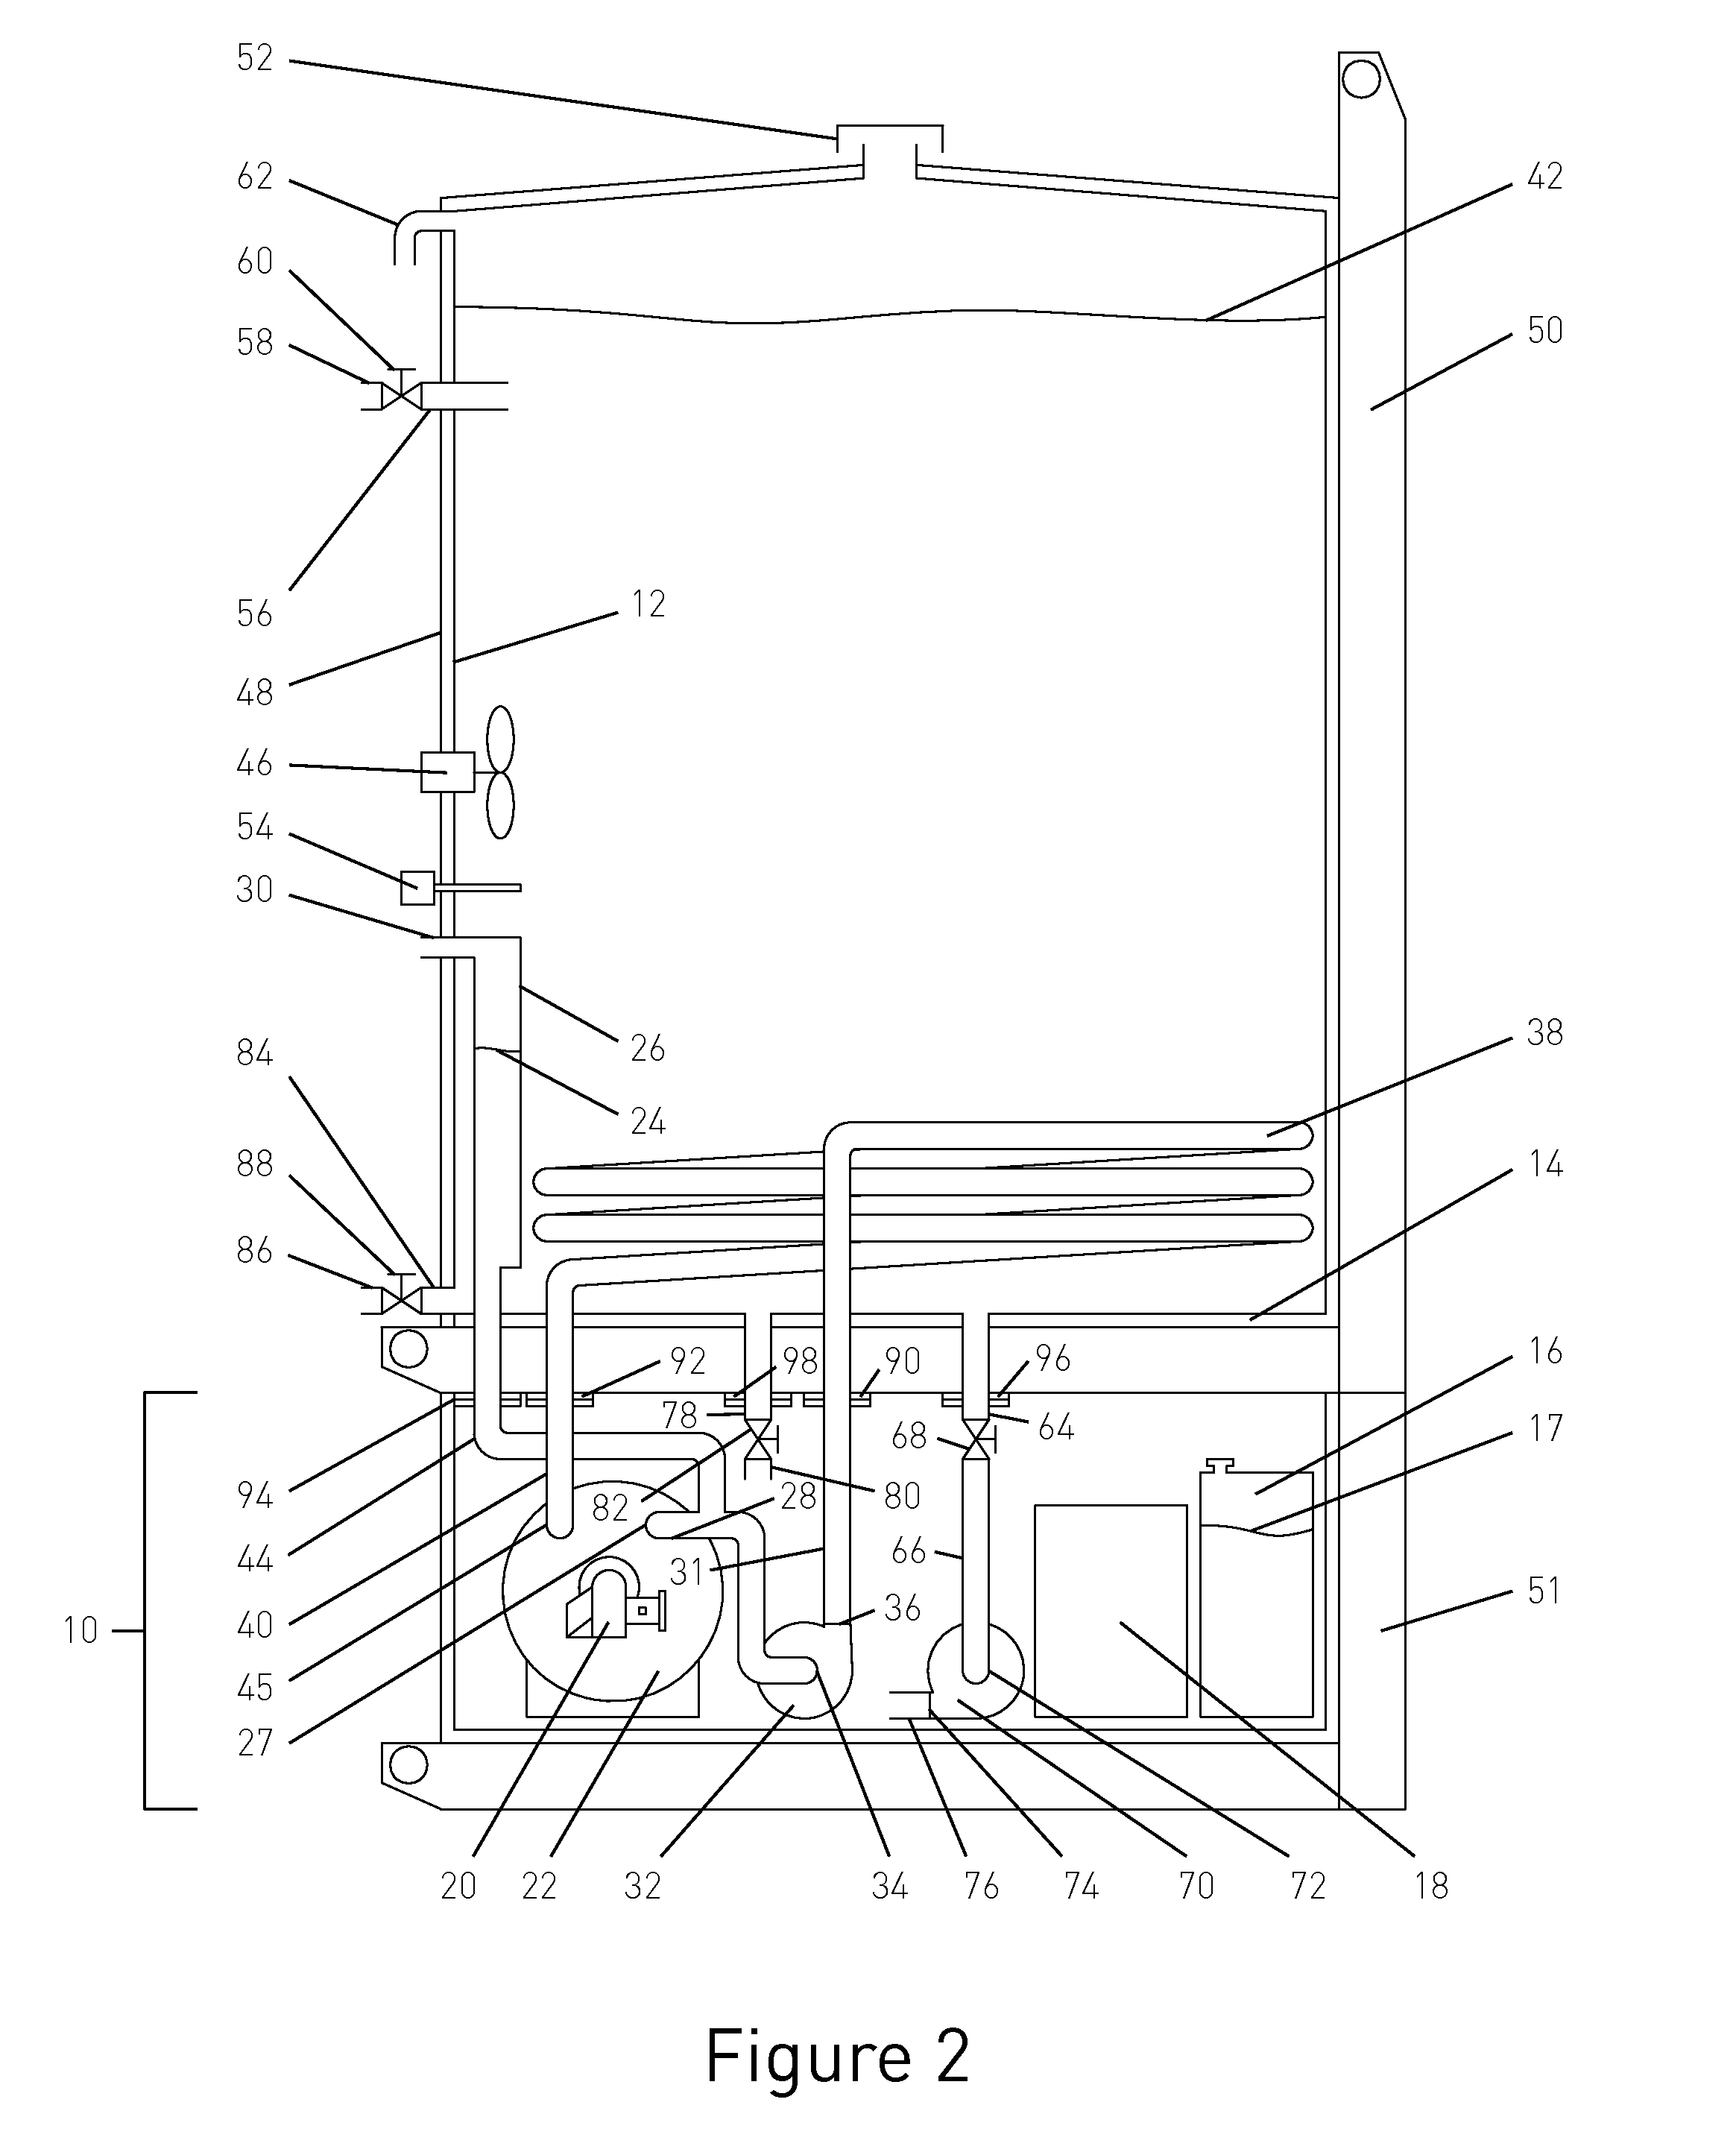 Method and Apparatus for Heating a Stored Liquid